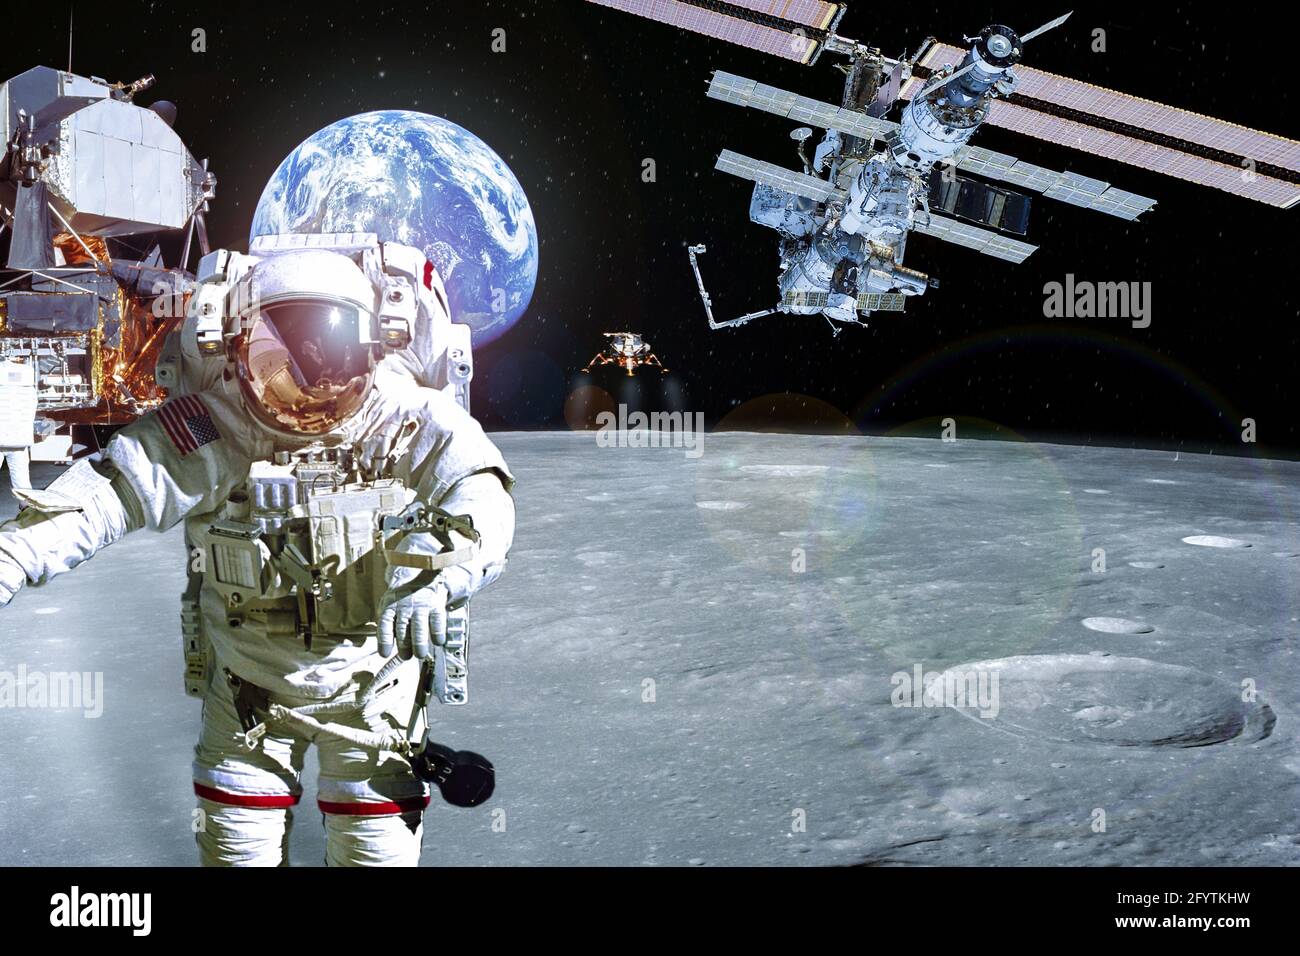 Lunar exploration concept - American astronaut in the foreground with spaceships and the Earth in the background. Elements of this image furnished by Stock Photo